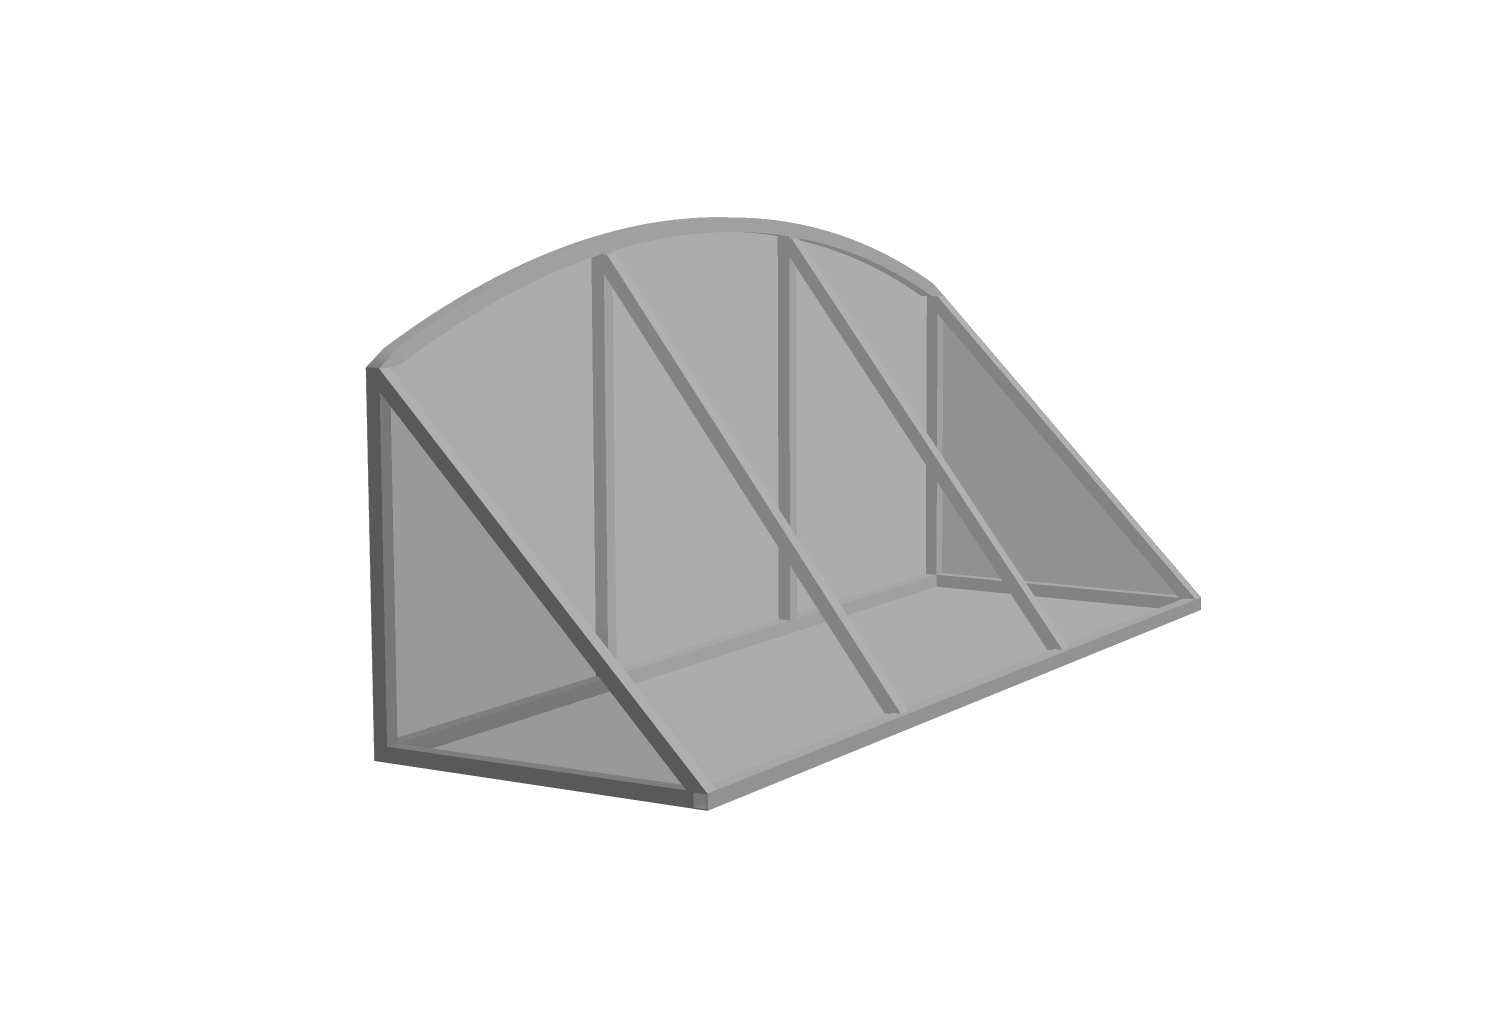 3D model of a rounded traditional awning